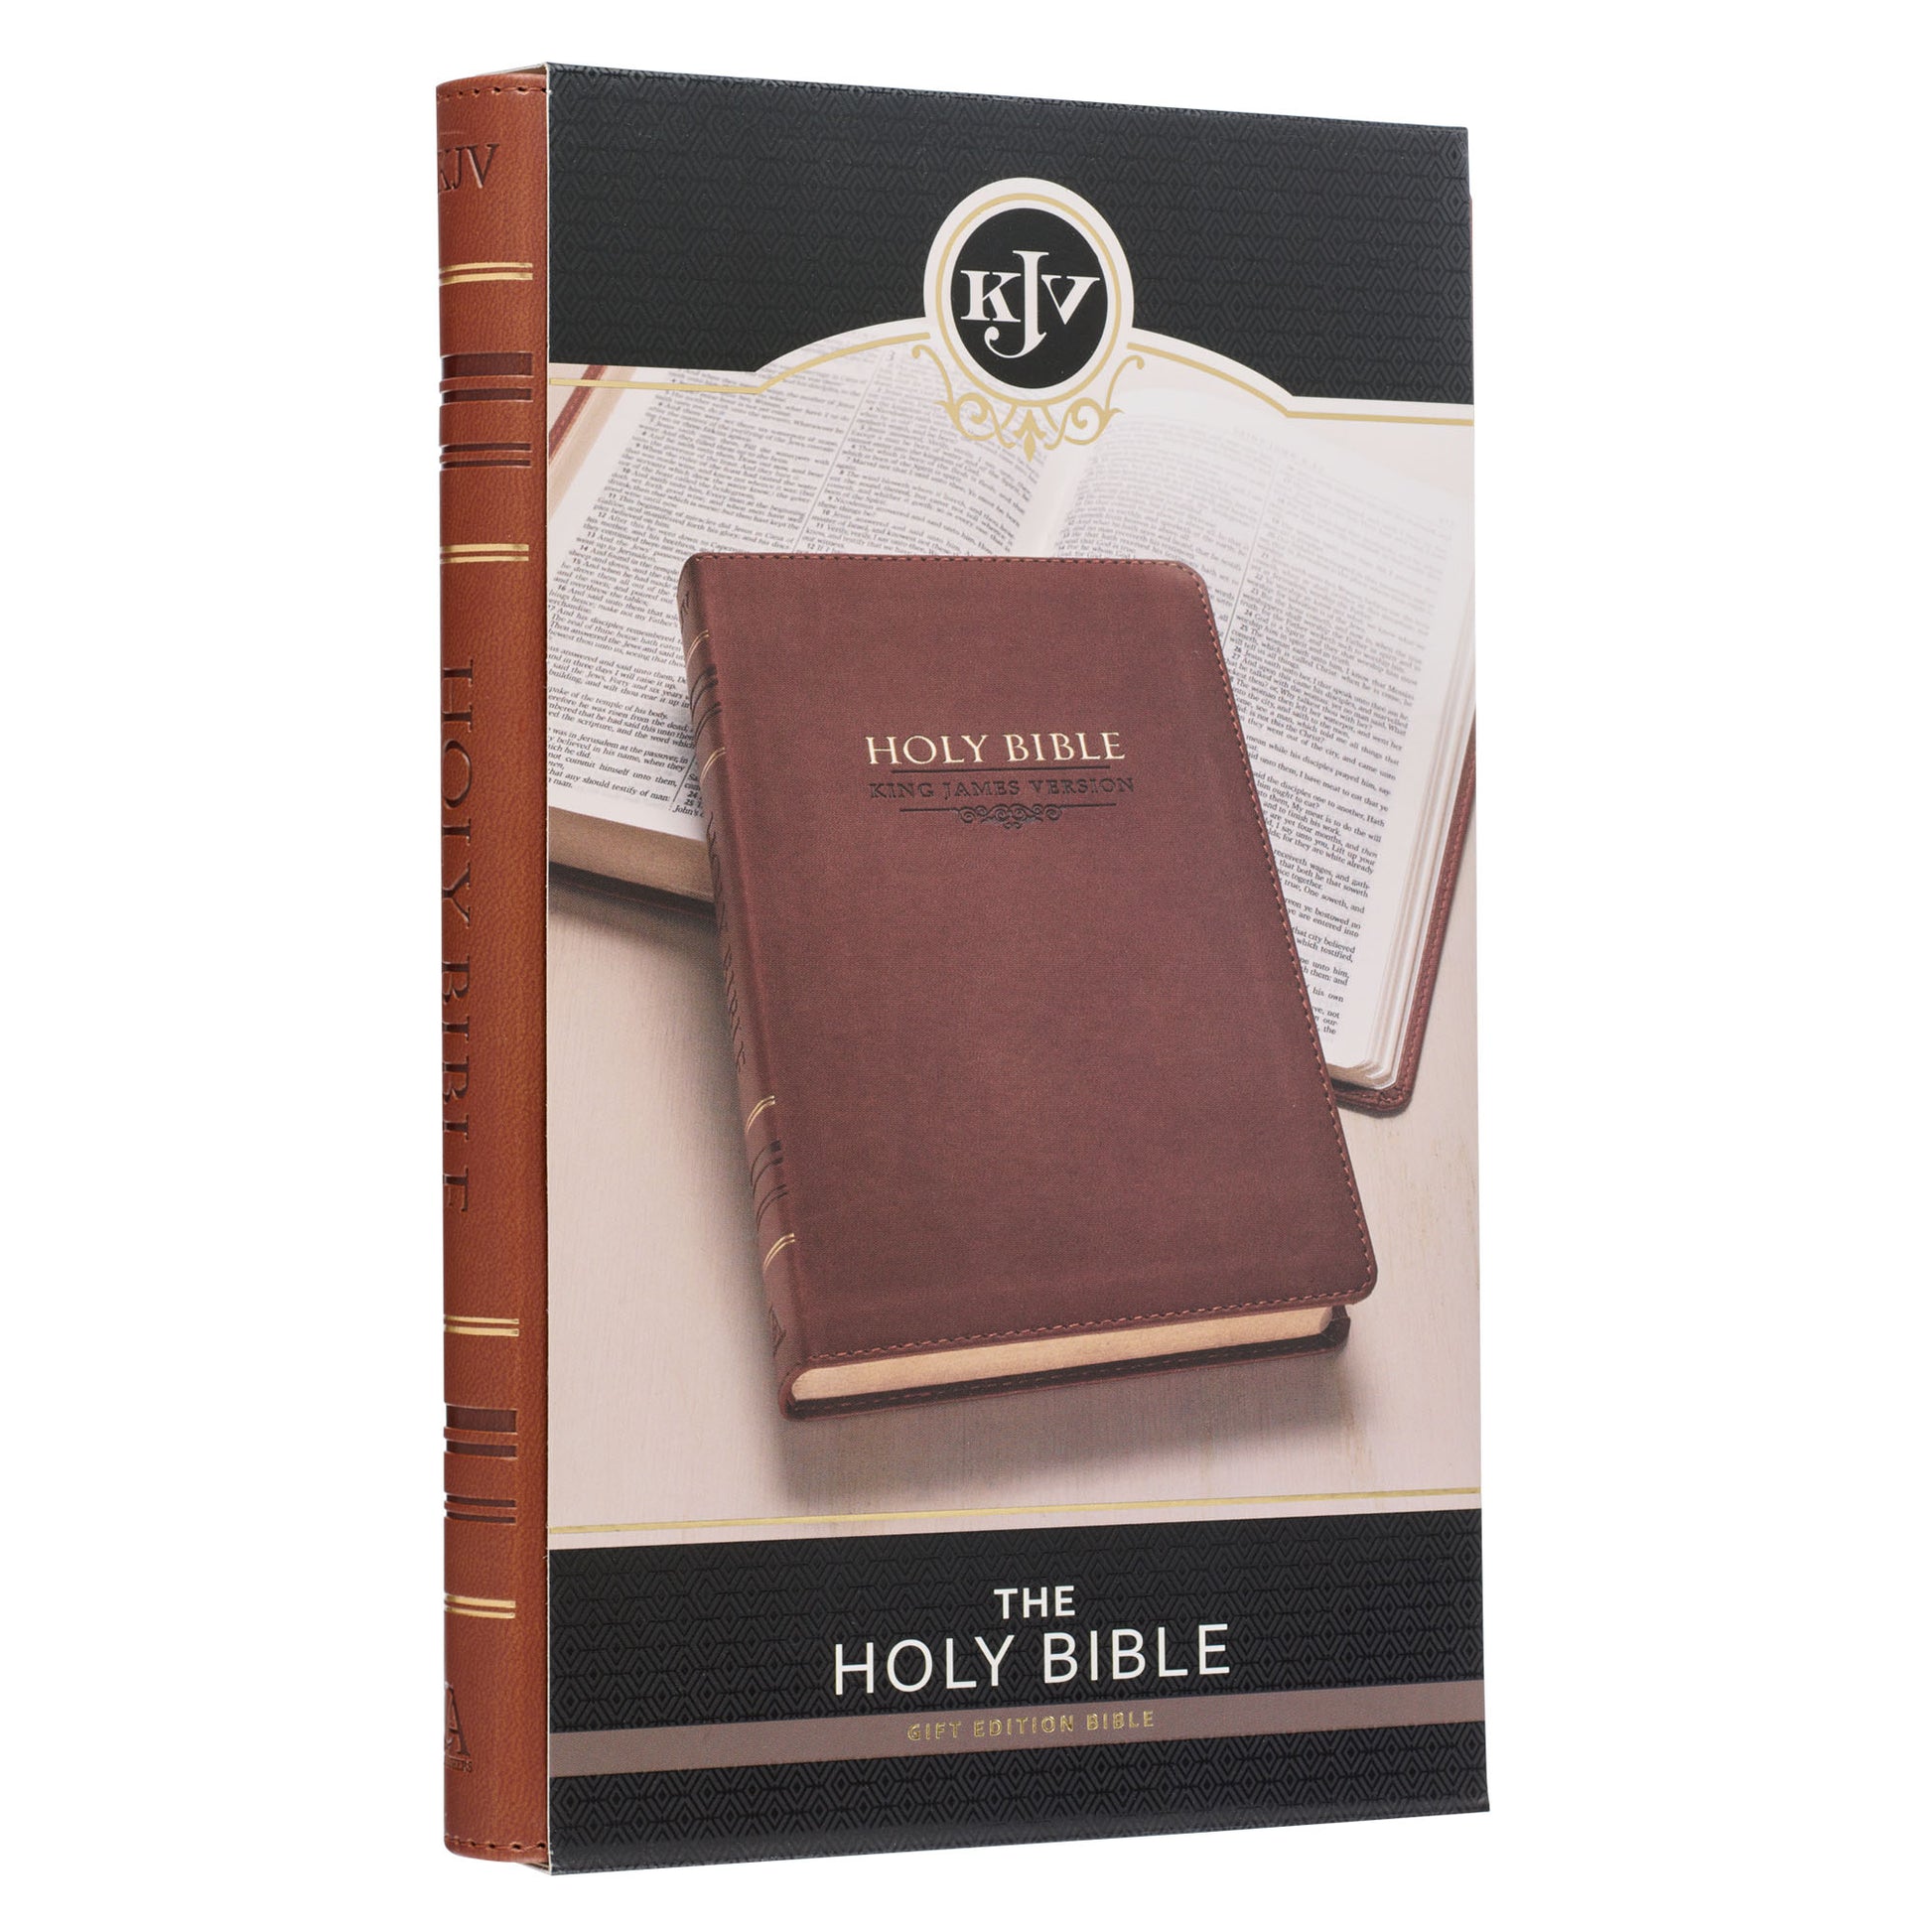 Saddle Tan Faux Leather Gift Edition King James Version Bible - The Christian Gift Company